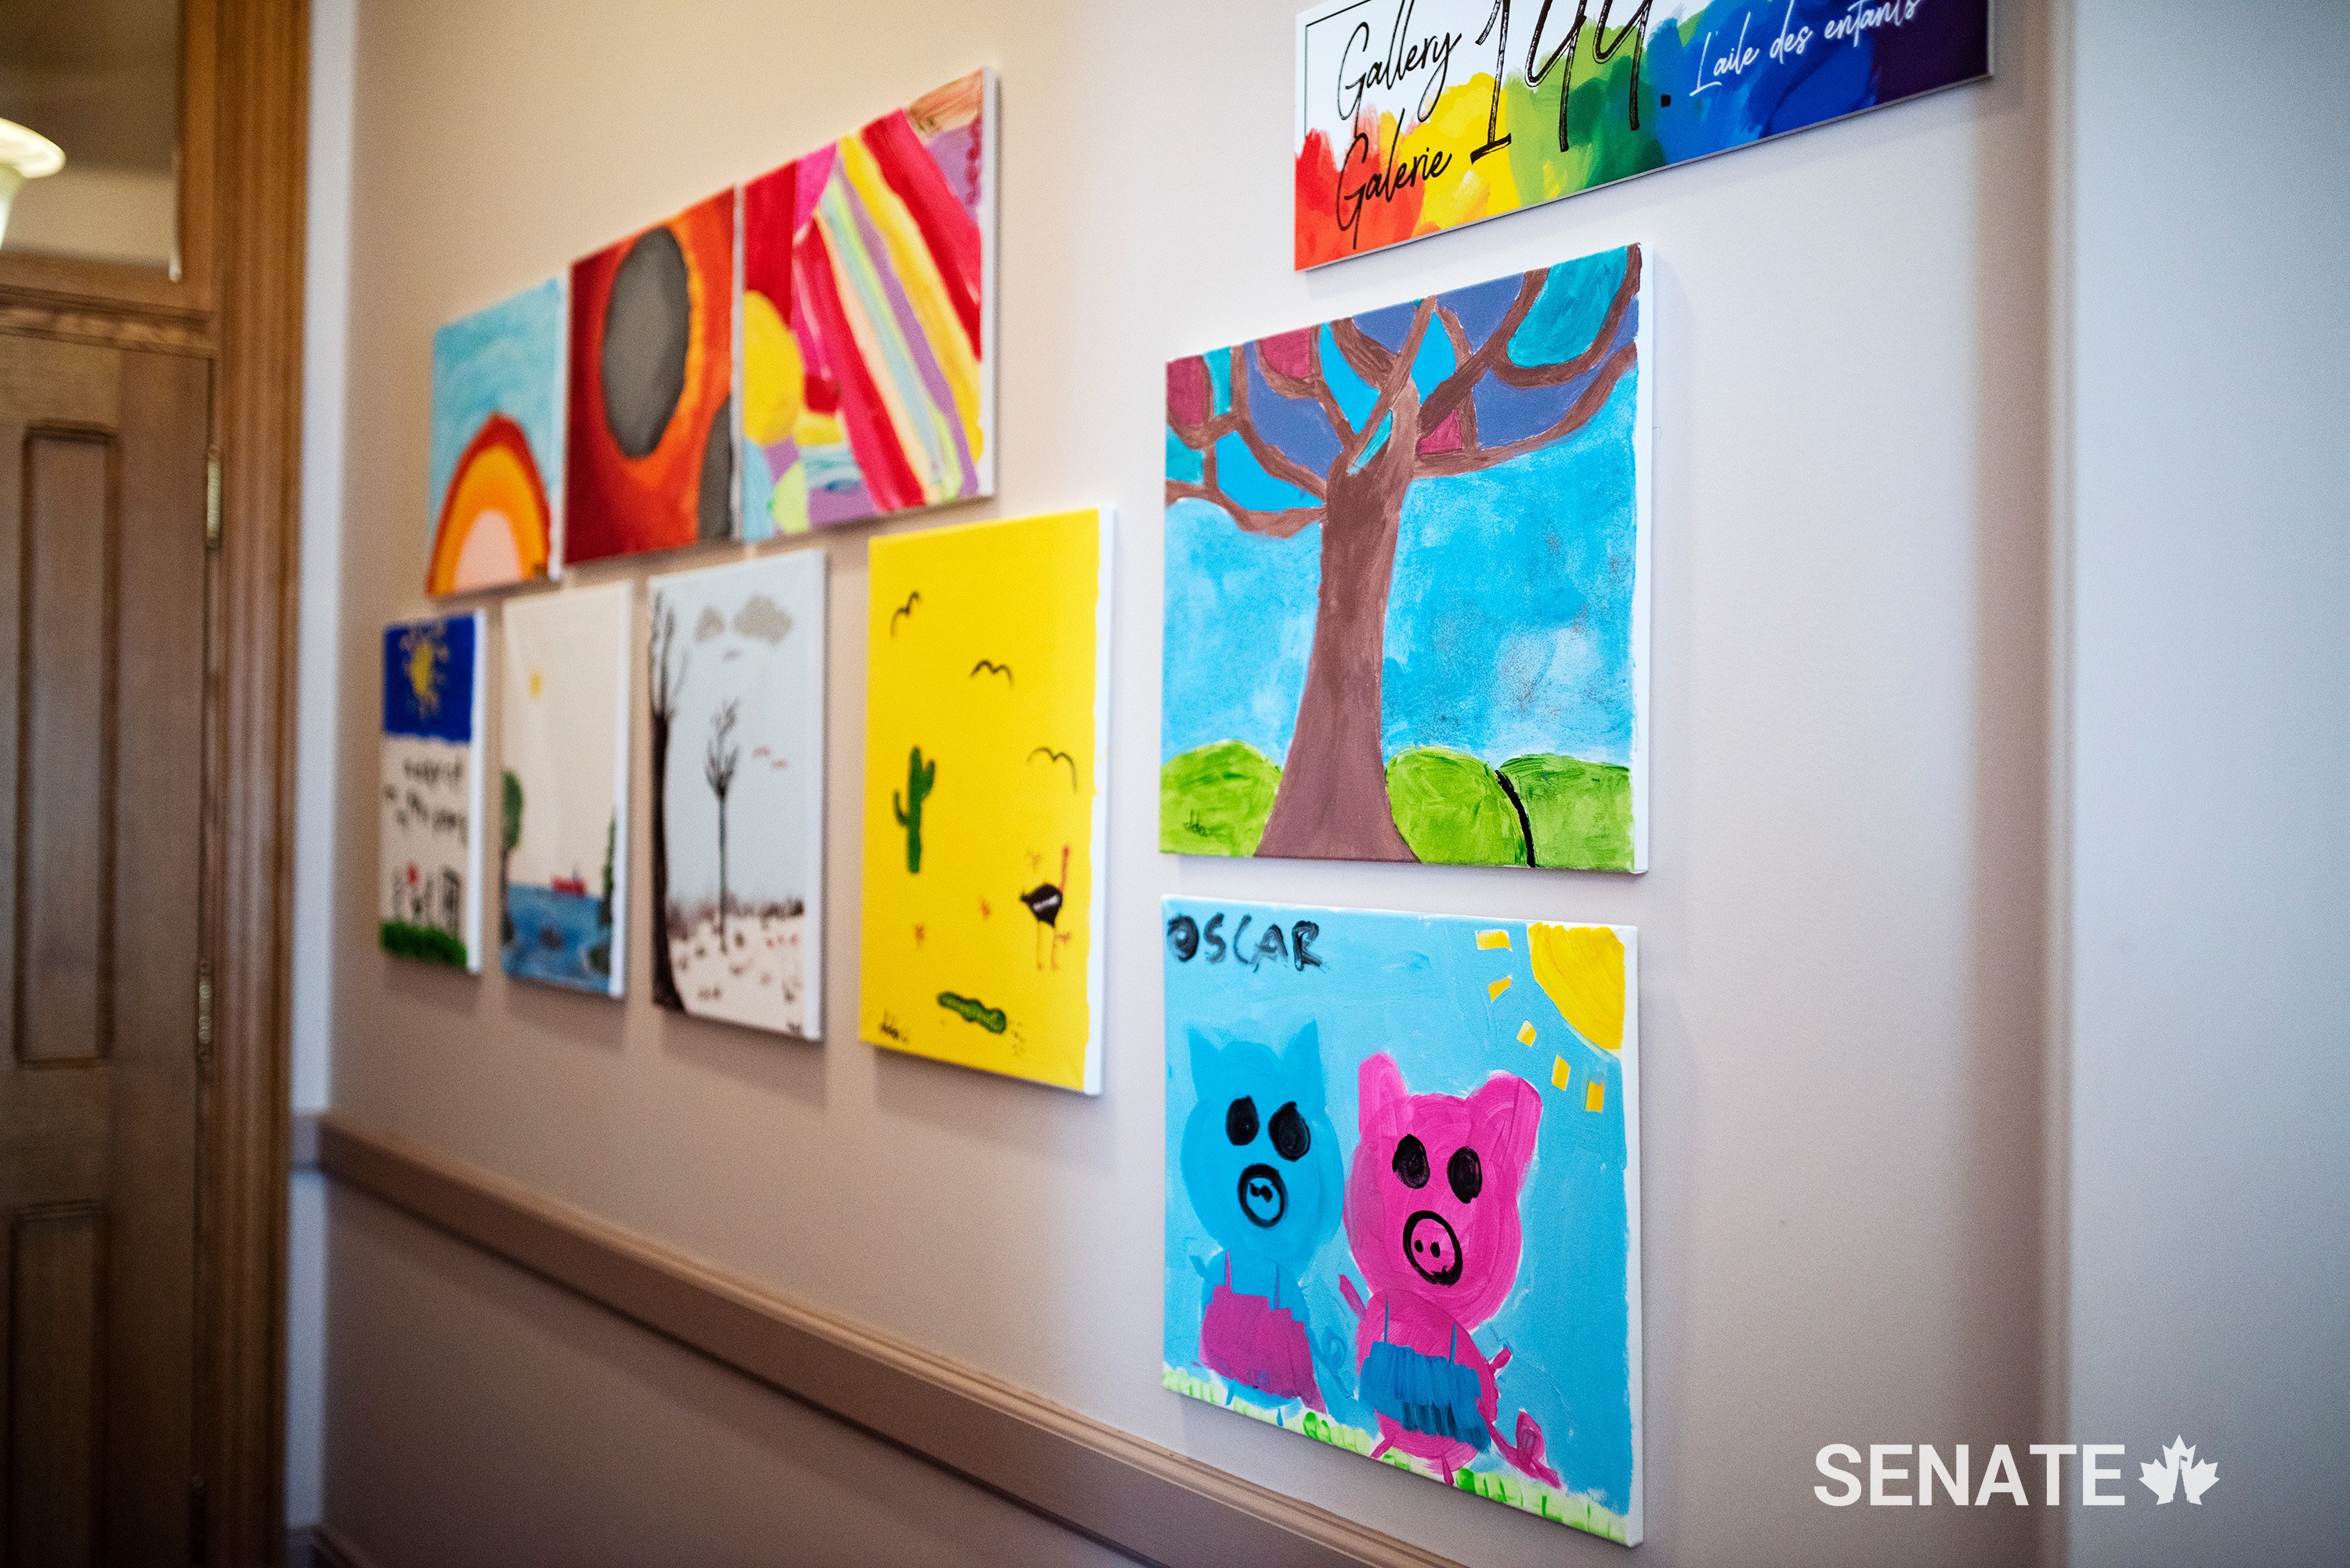 Children’s art created in her annual children’s painting event is installed in Senator Bovey’s office, in Gallery 144, also known as “The Kids Wing.”